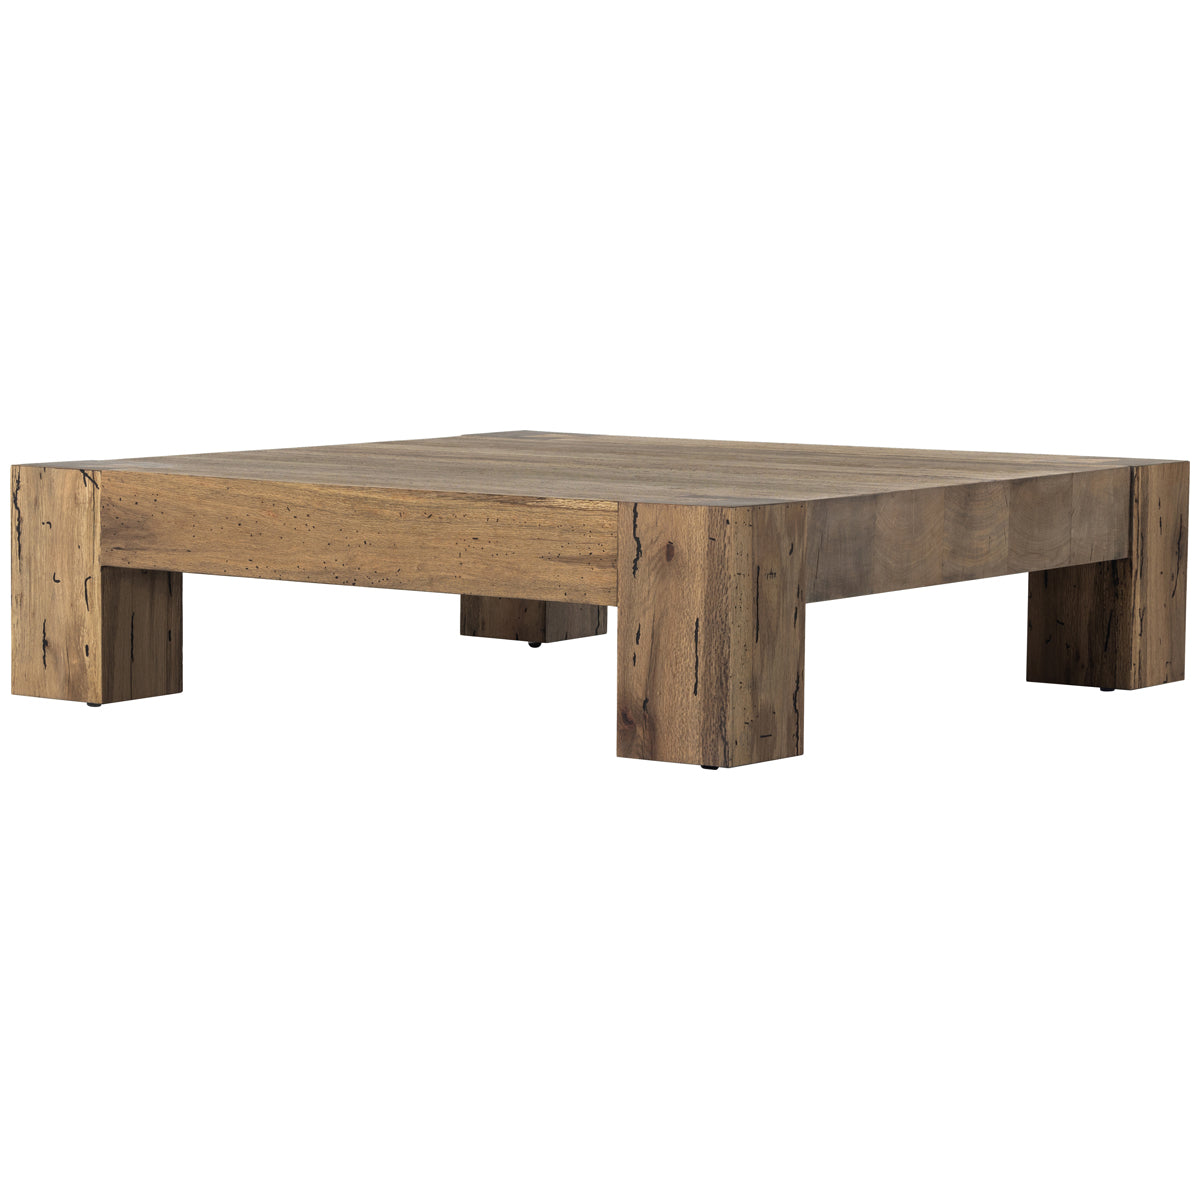 Four Hands Wesson Abaso Coffee Table - Rustic Wormwood Oak